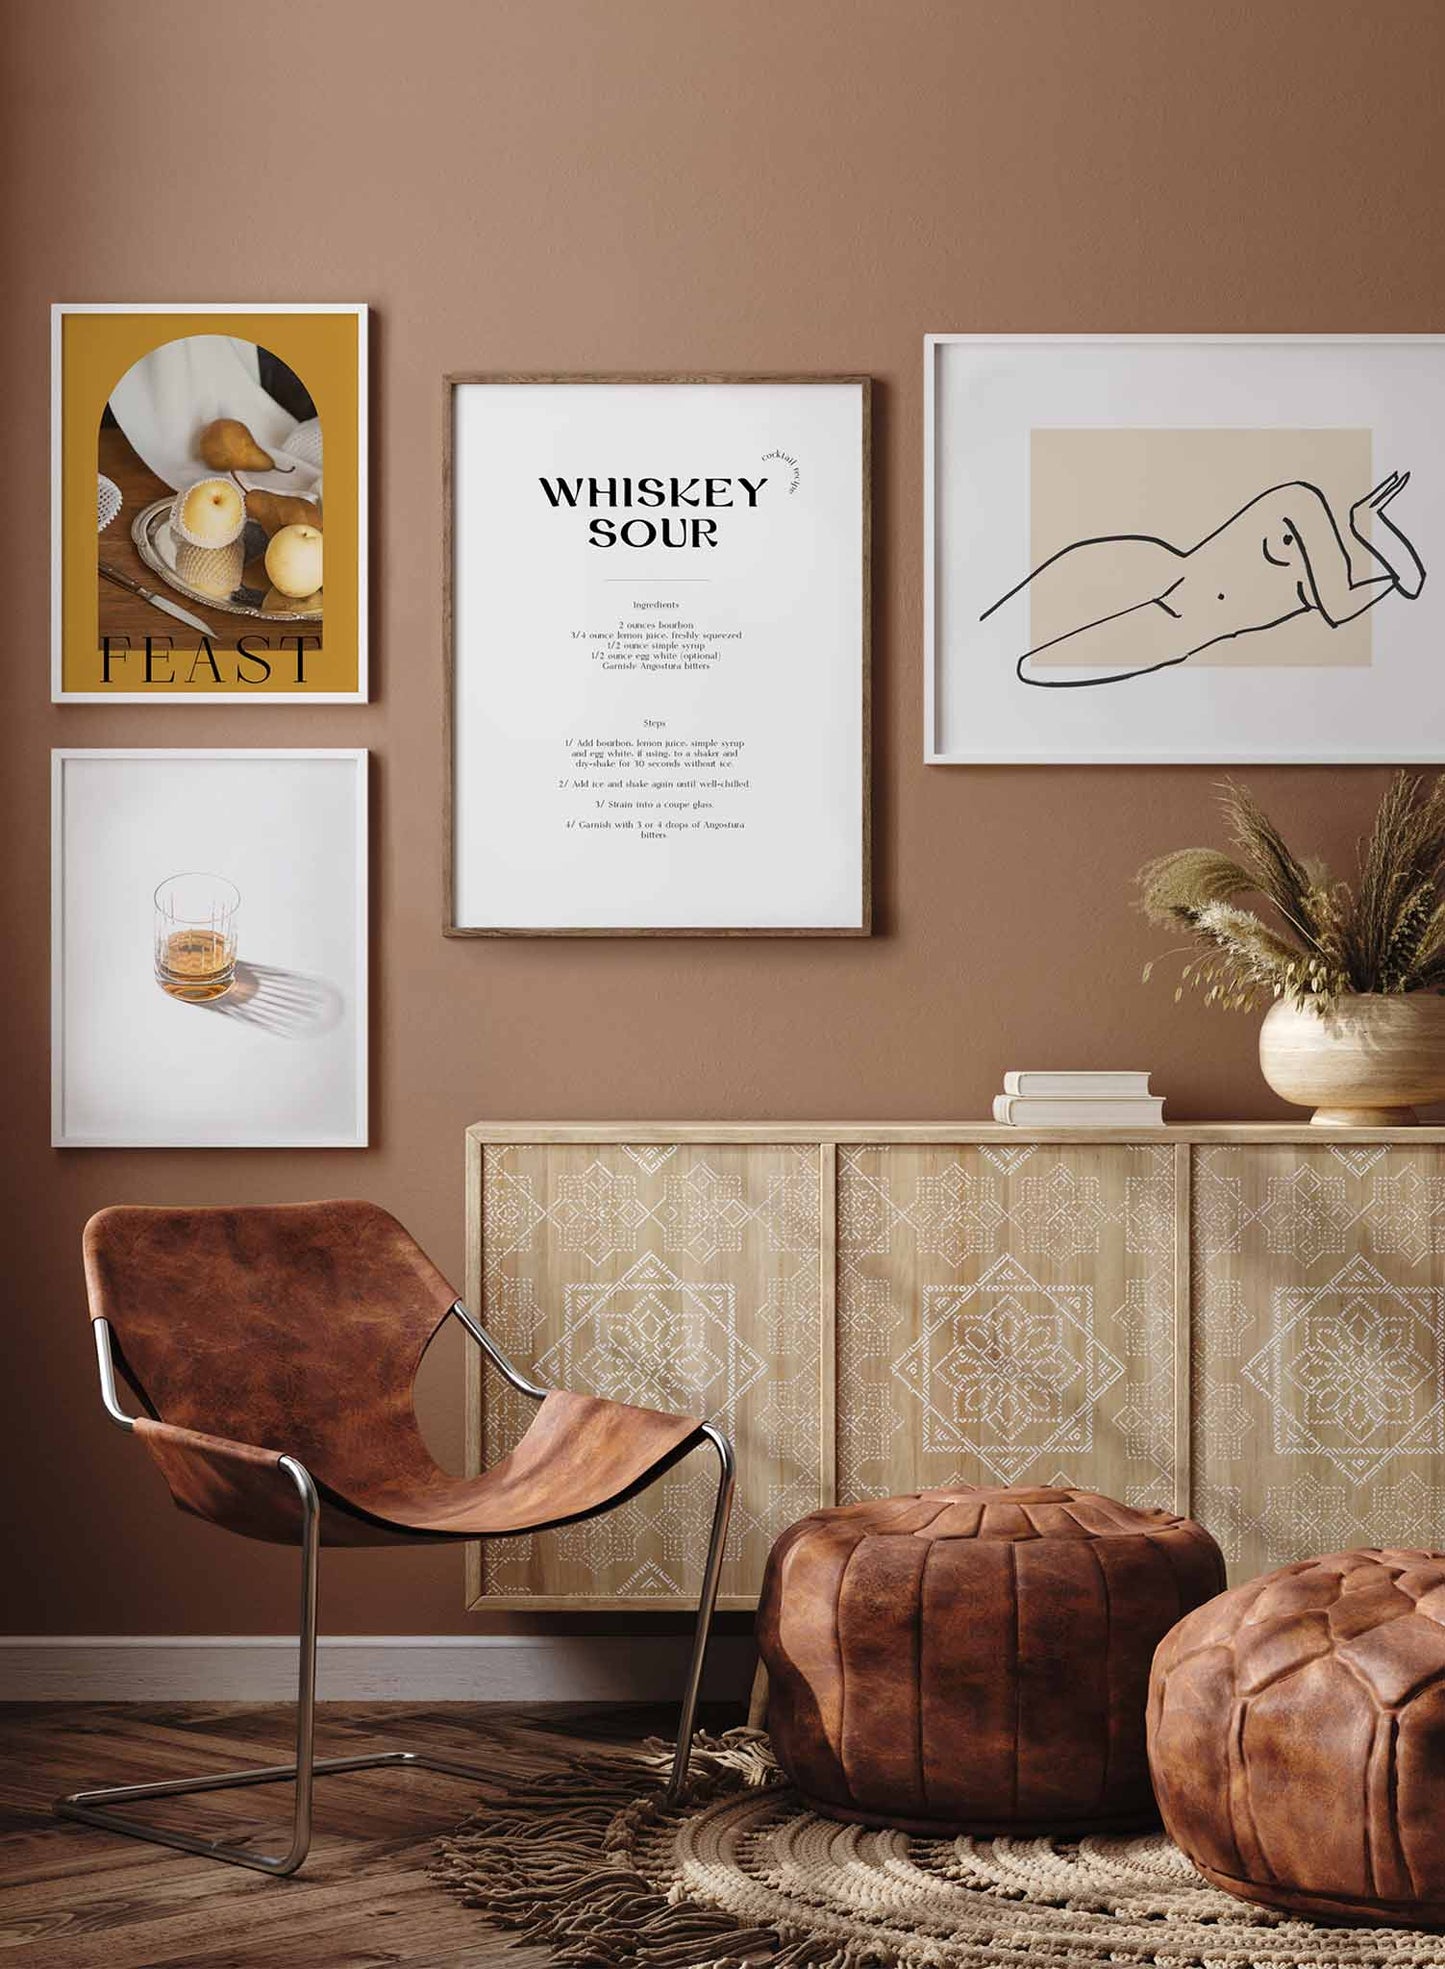 Whiskey Sour is a cocktail recipe typography poster by Opposite Wall.